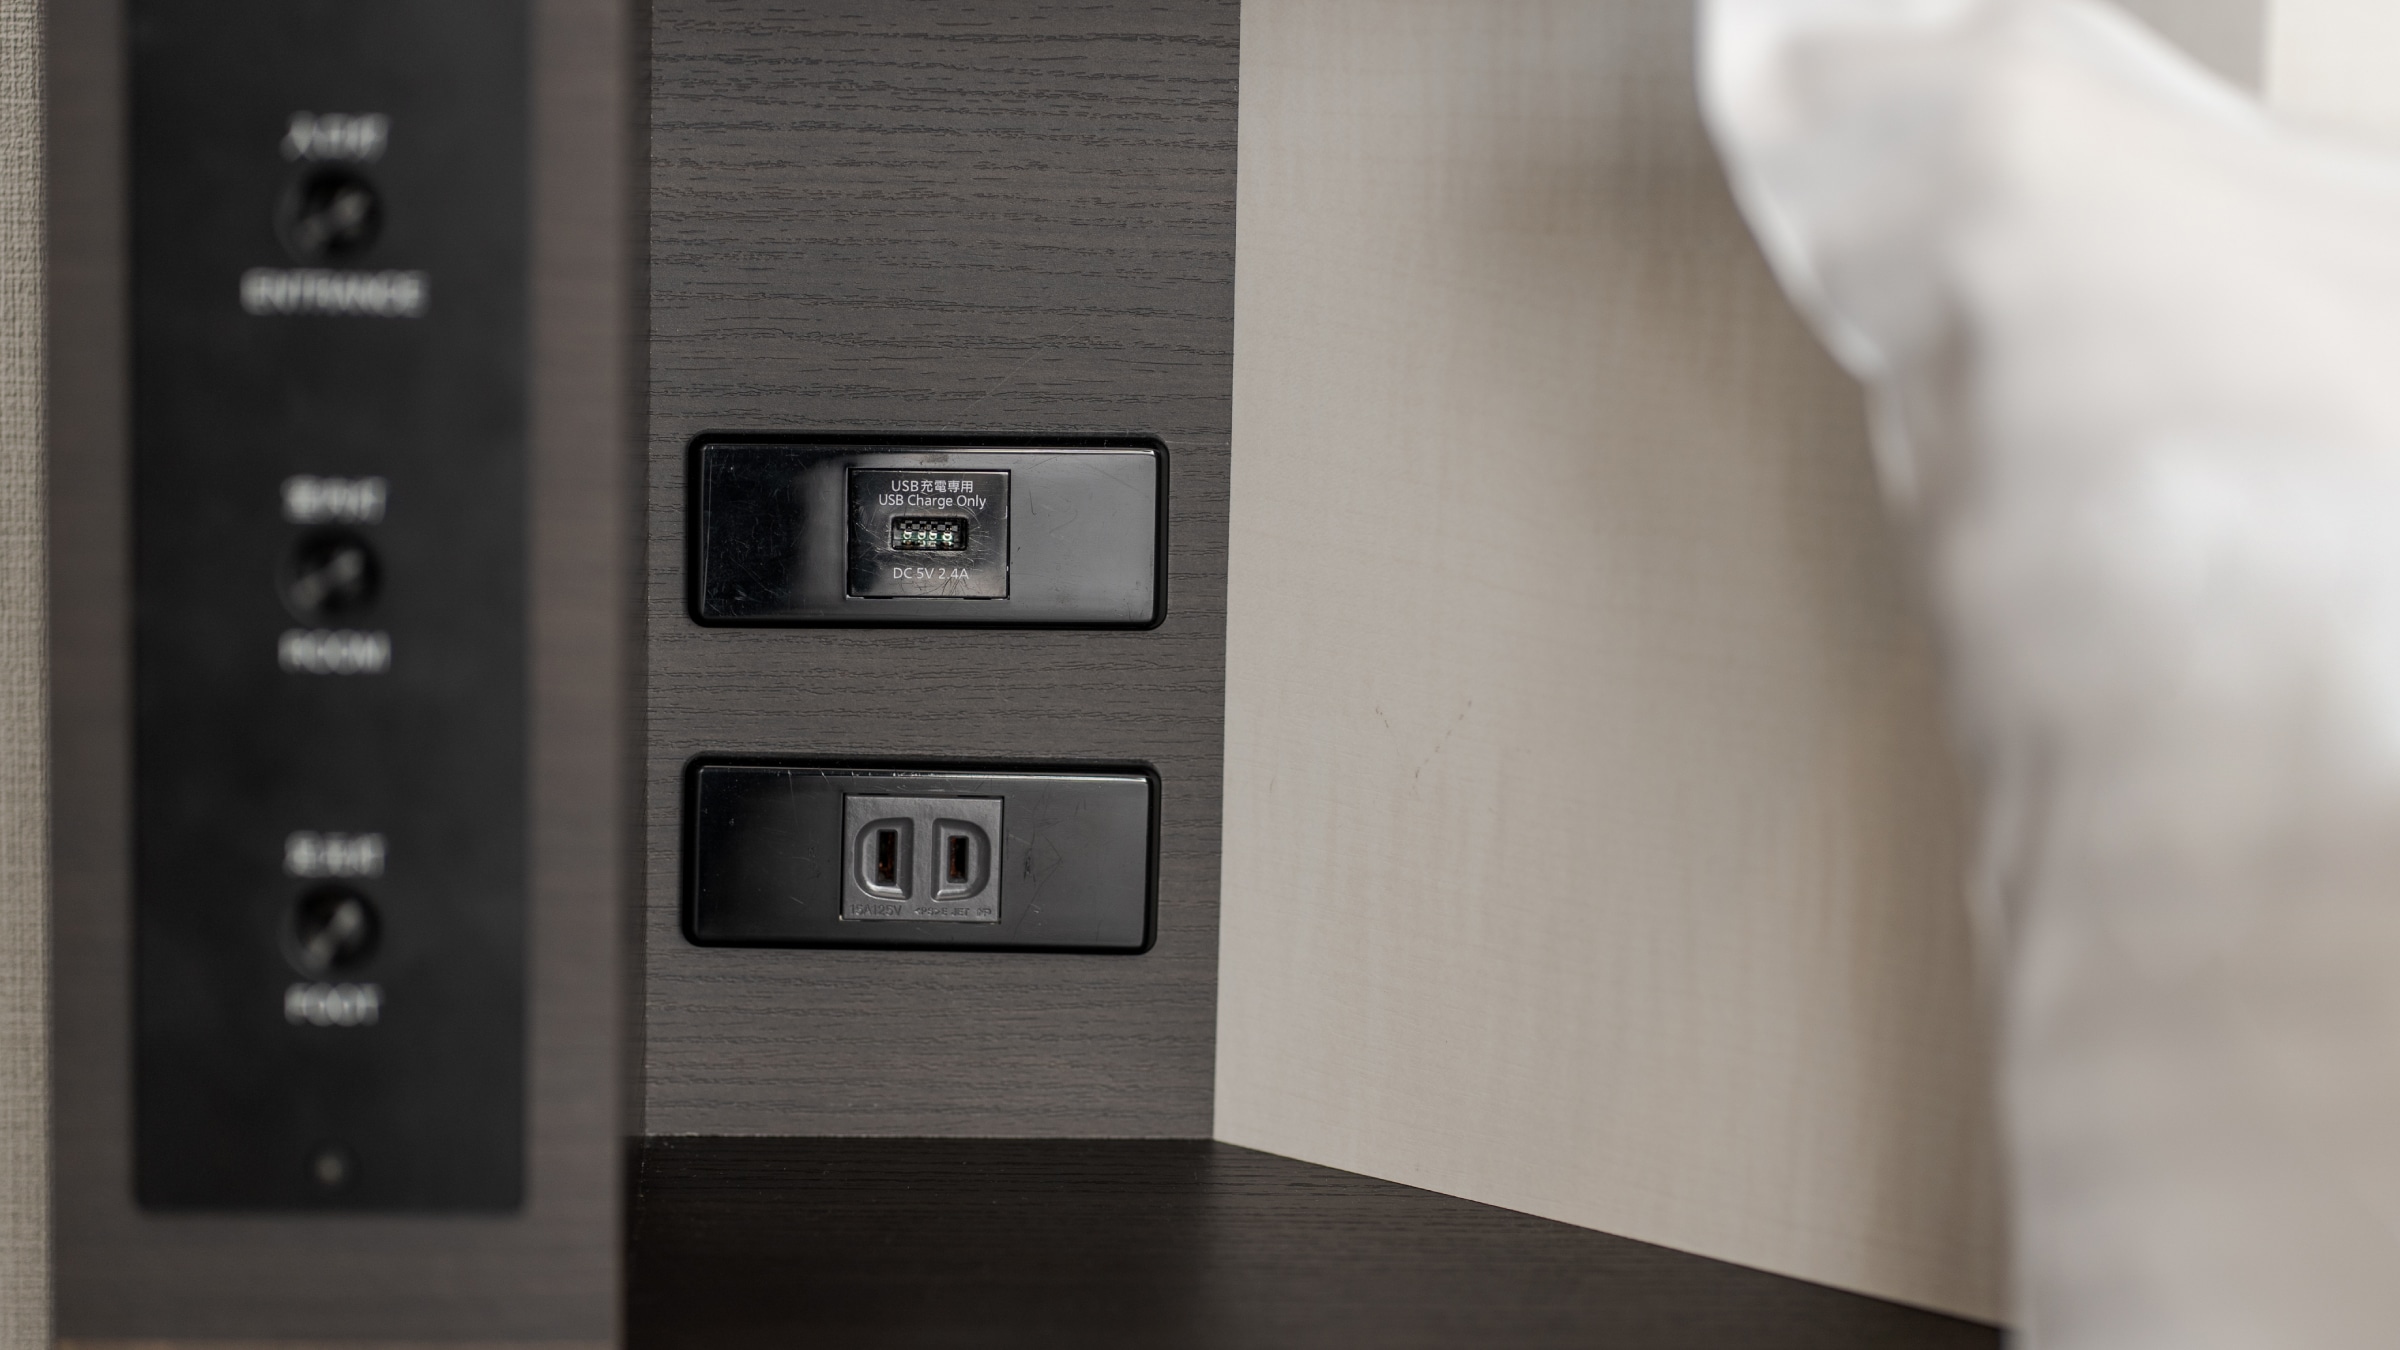 [Guest rooms] All rooms are equipped with outlets and USB ports at the bedside